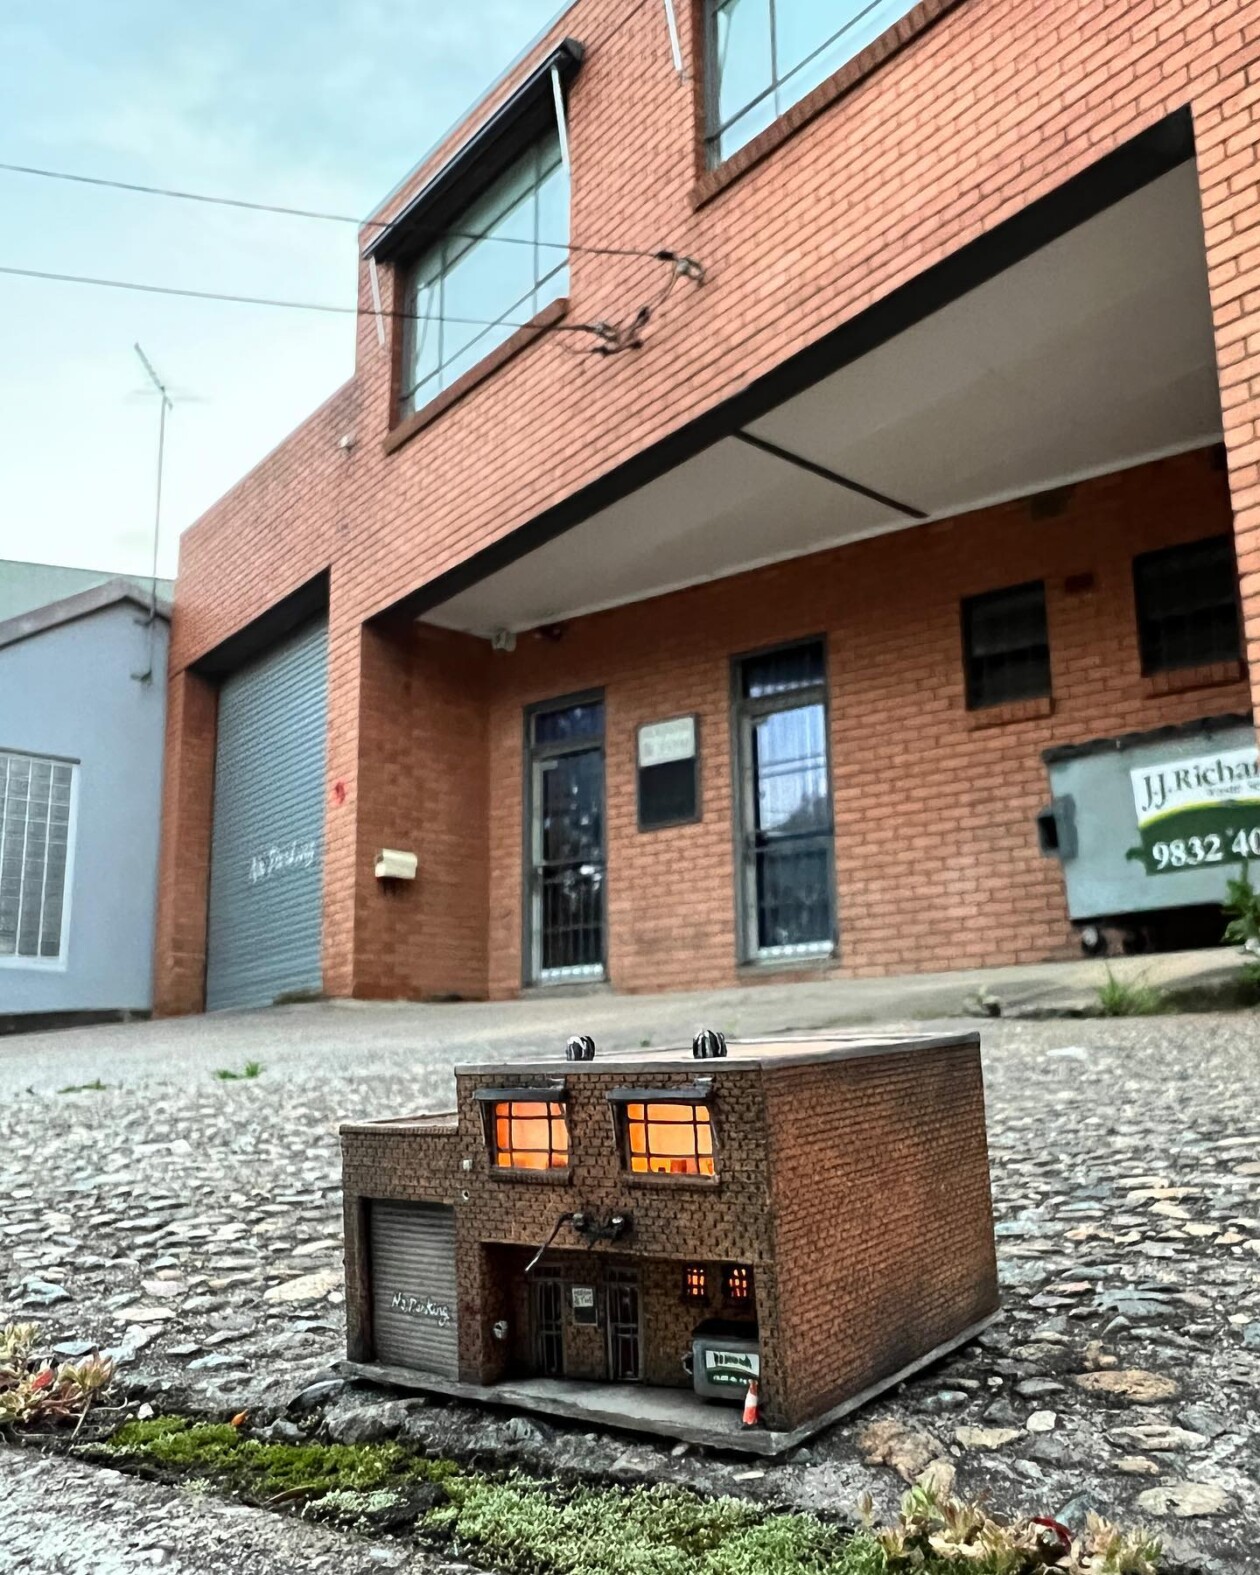 Whimsical Everyday Life And Historical Buildings In Miniature By Mylyn Nguyen (17)